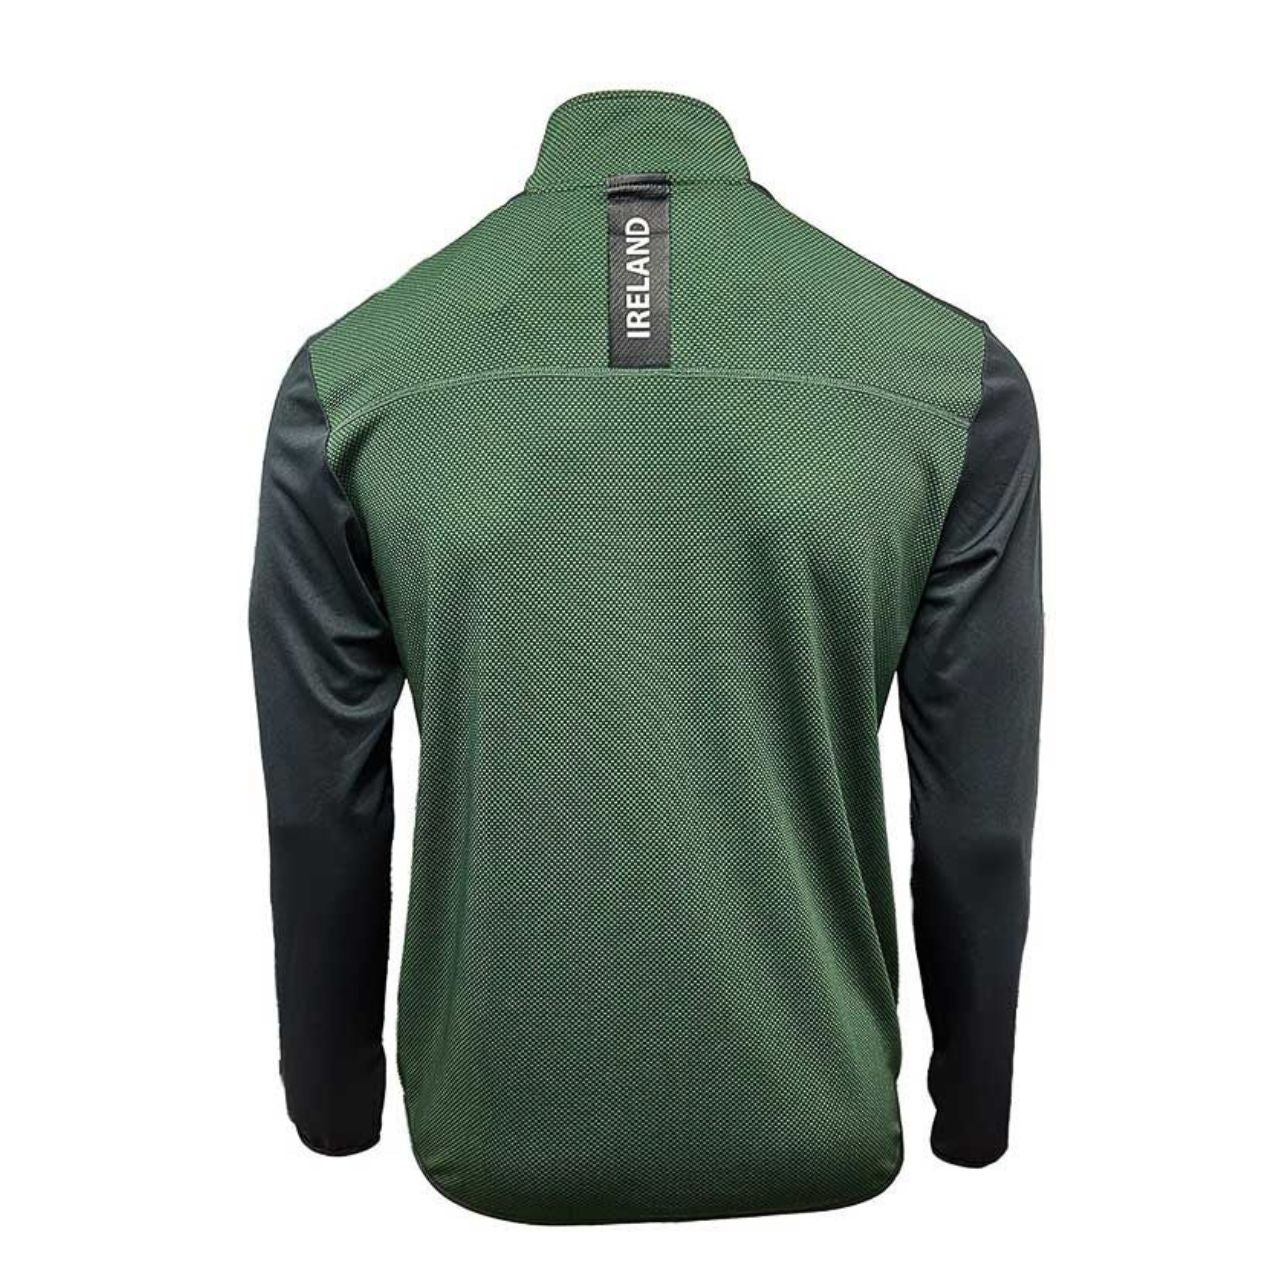 Designed for optimal performance and maximum comfort, the Lansdowne Men's Ireland Quarter Zip boasts enhanced breathability and the iconic Ireland four province crest on the left chest.